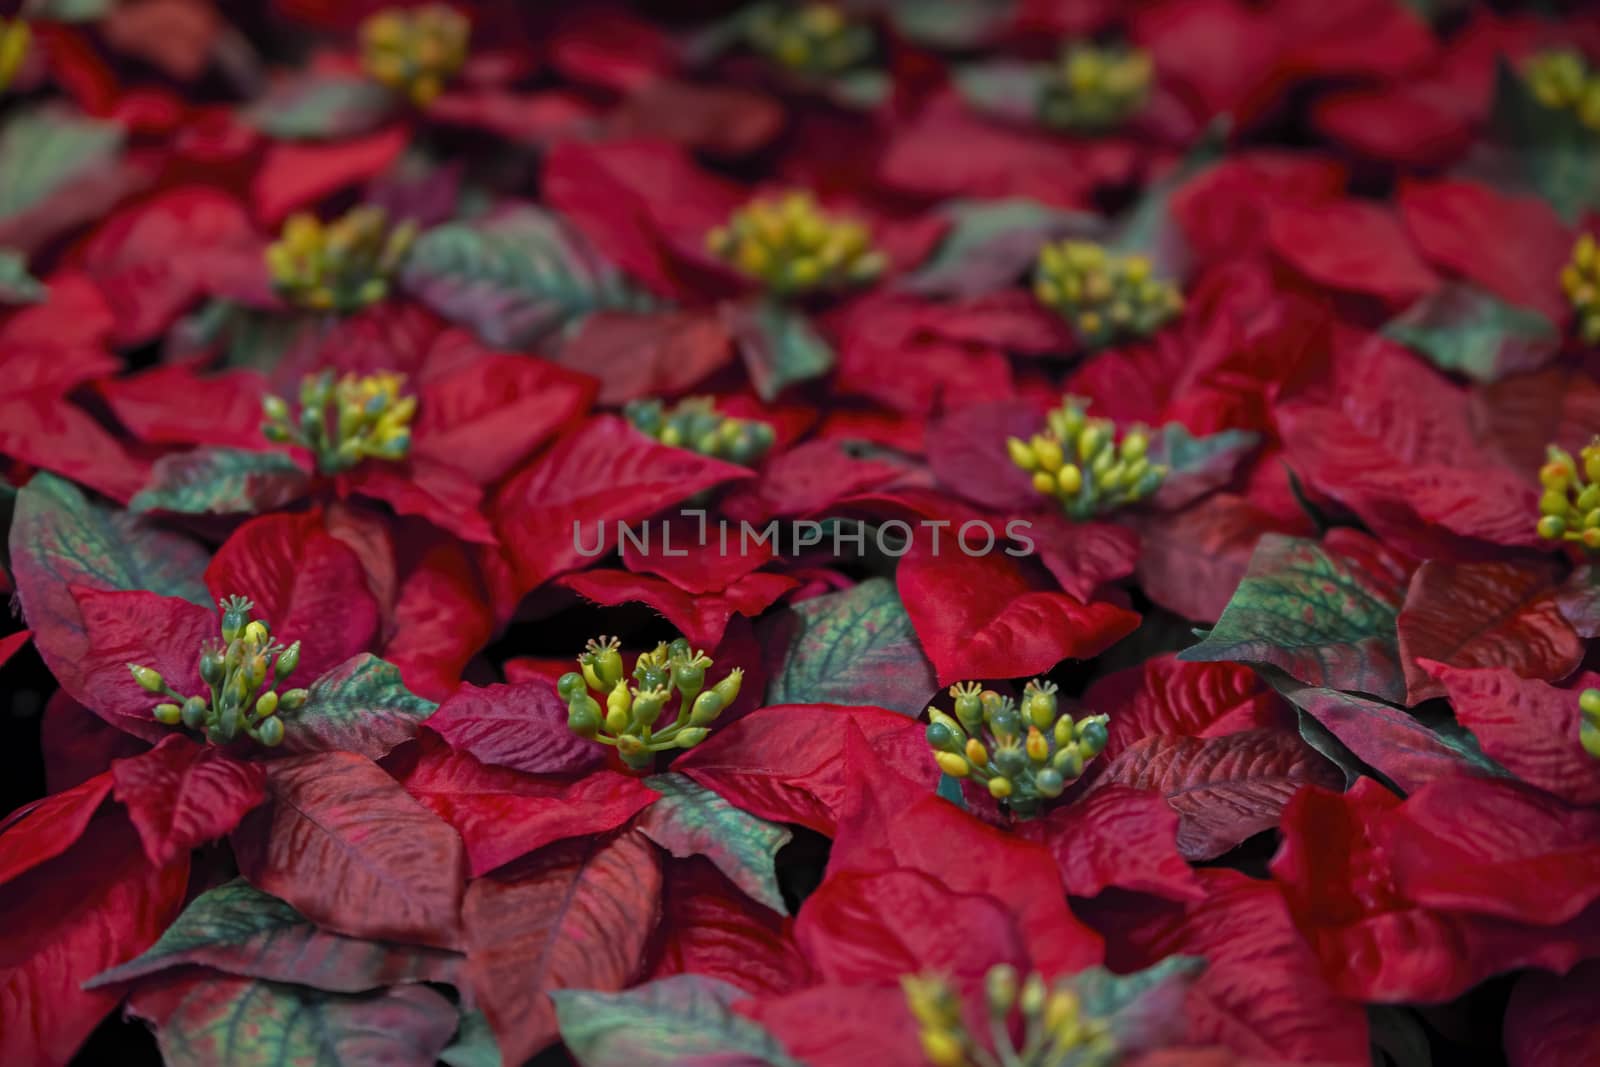 Closeup of red poinsettia flowers Euphorbia pulcherrima. Traditional Christmas flower which decorate the holiday home.